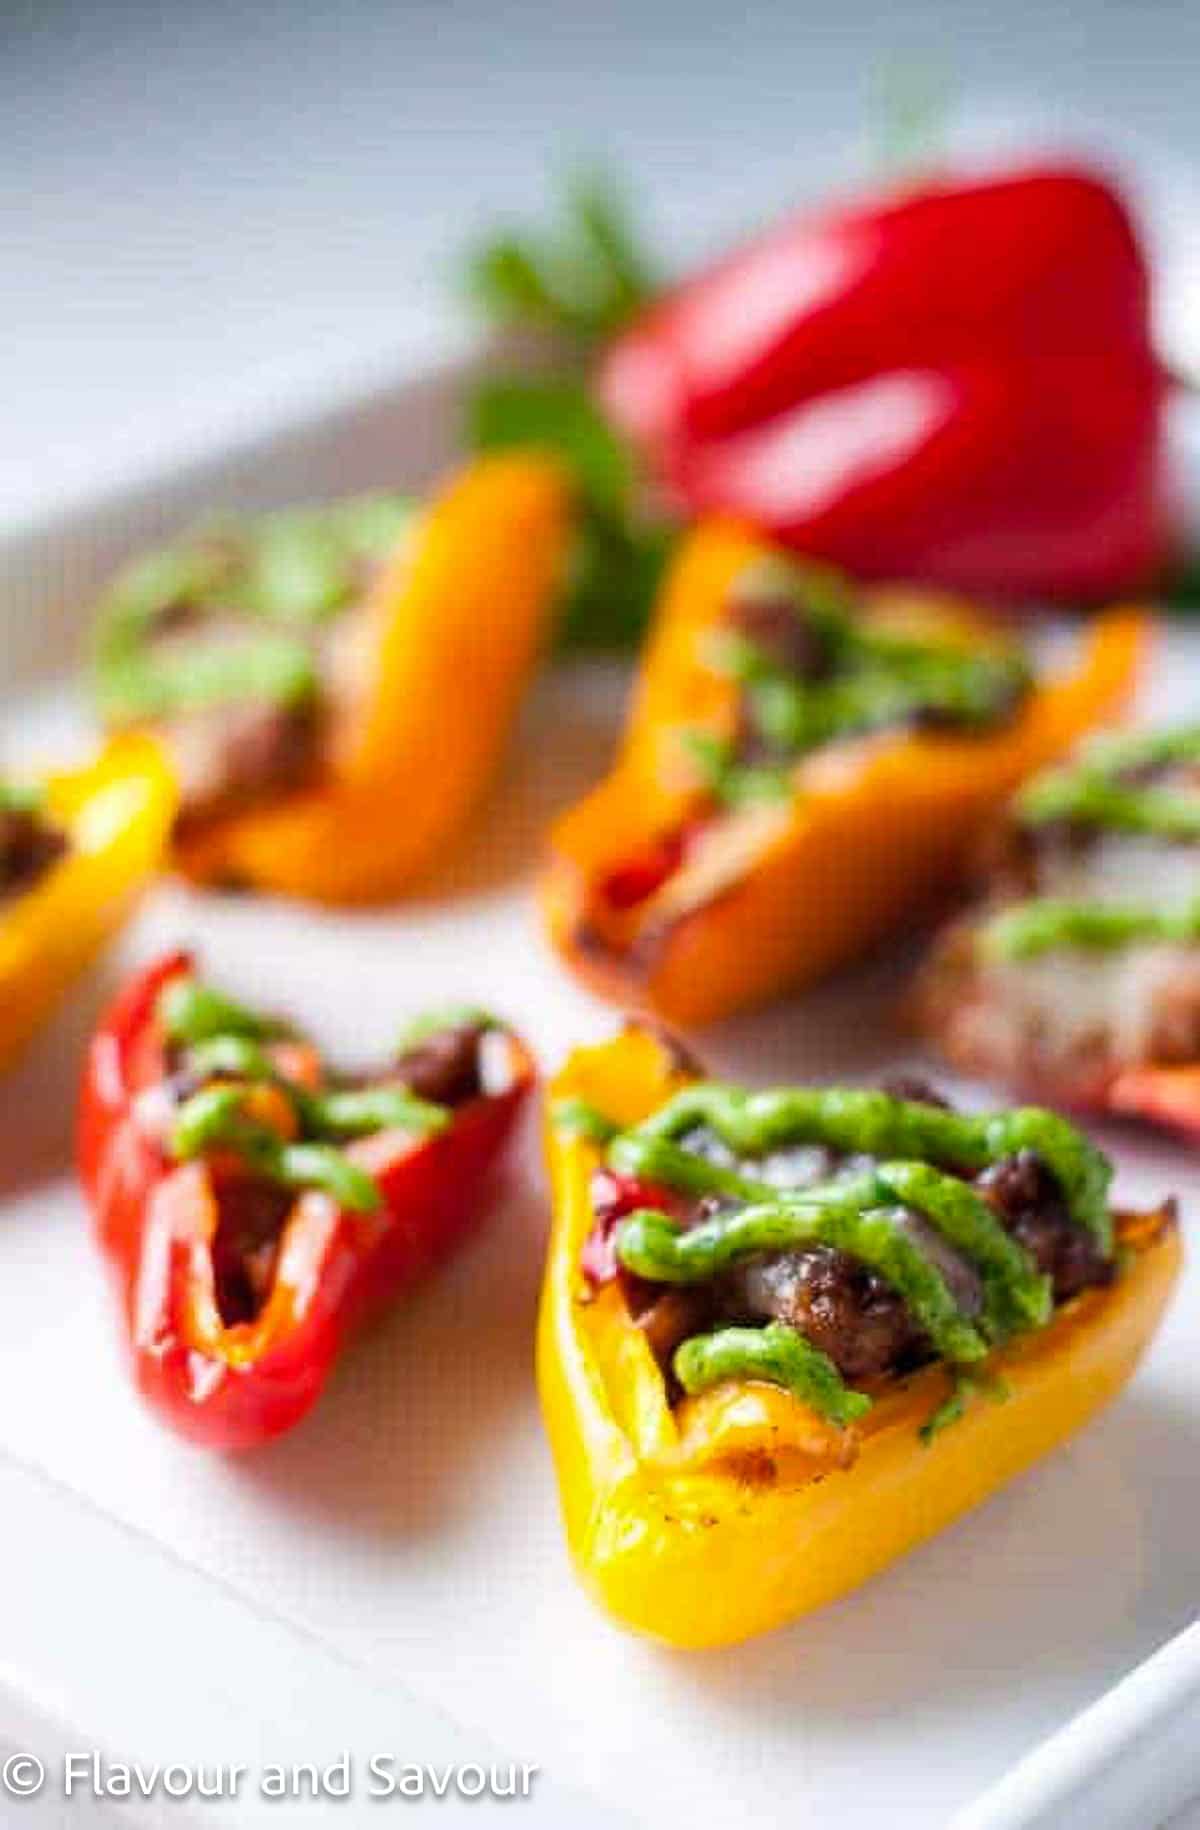 Mini bell peppers stuffed with taco seasoned meat and cheese.